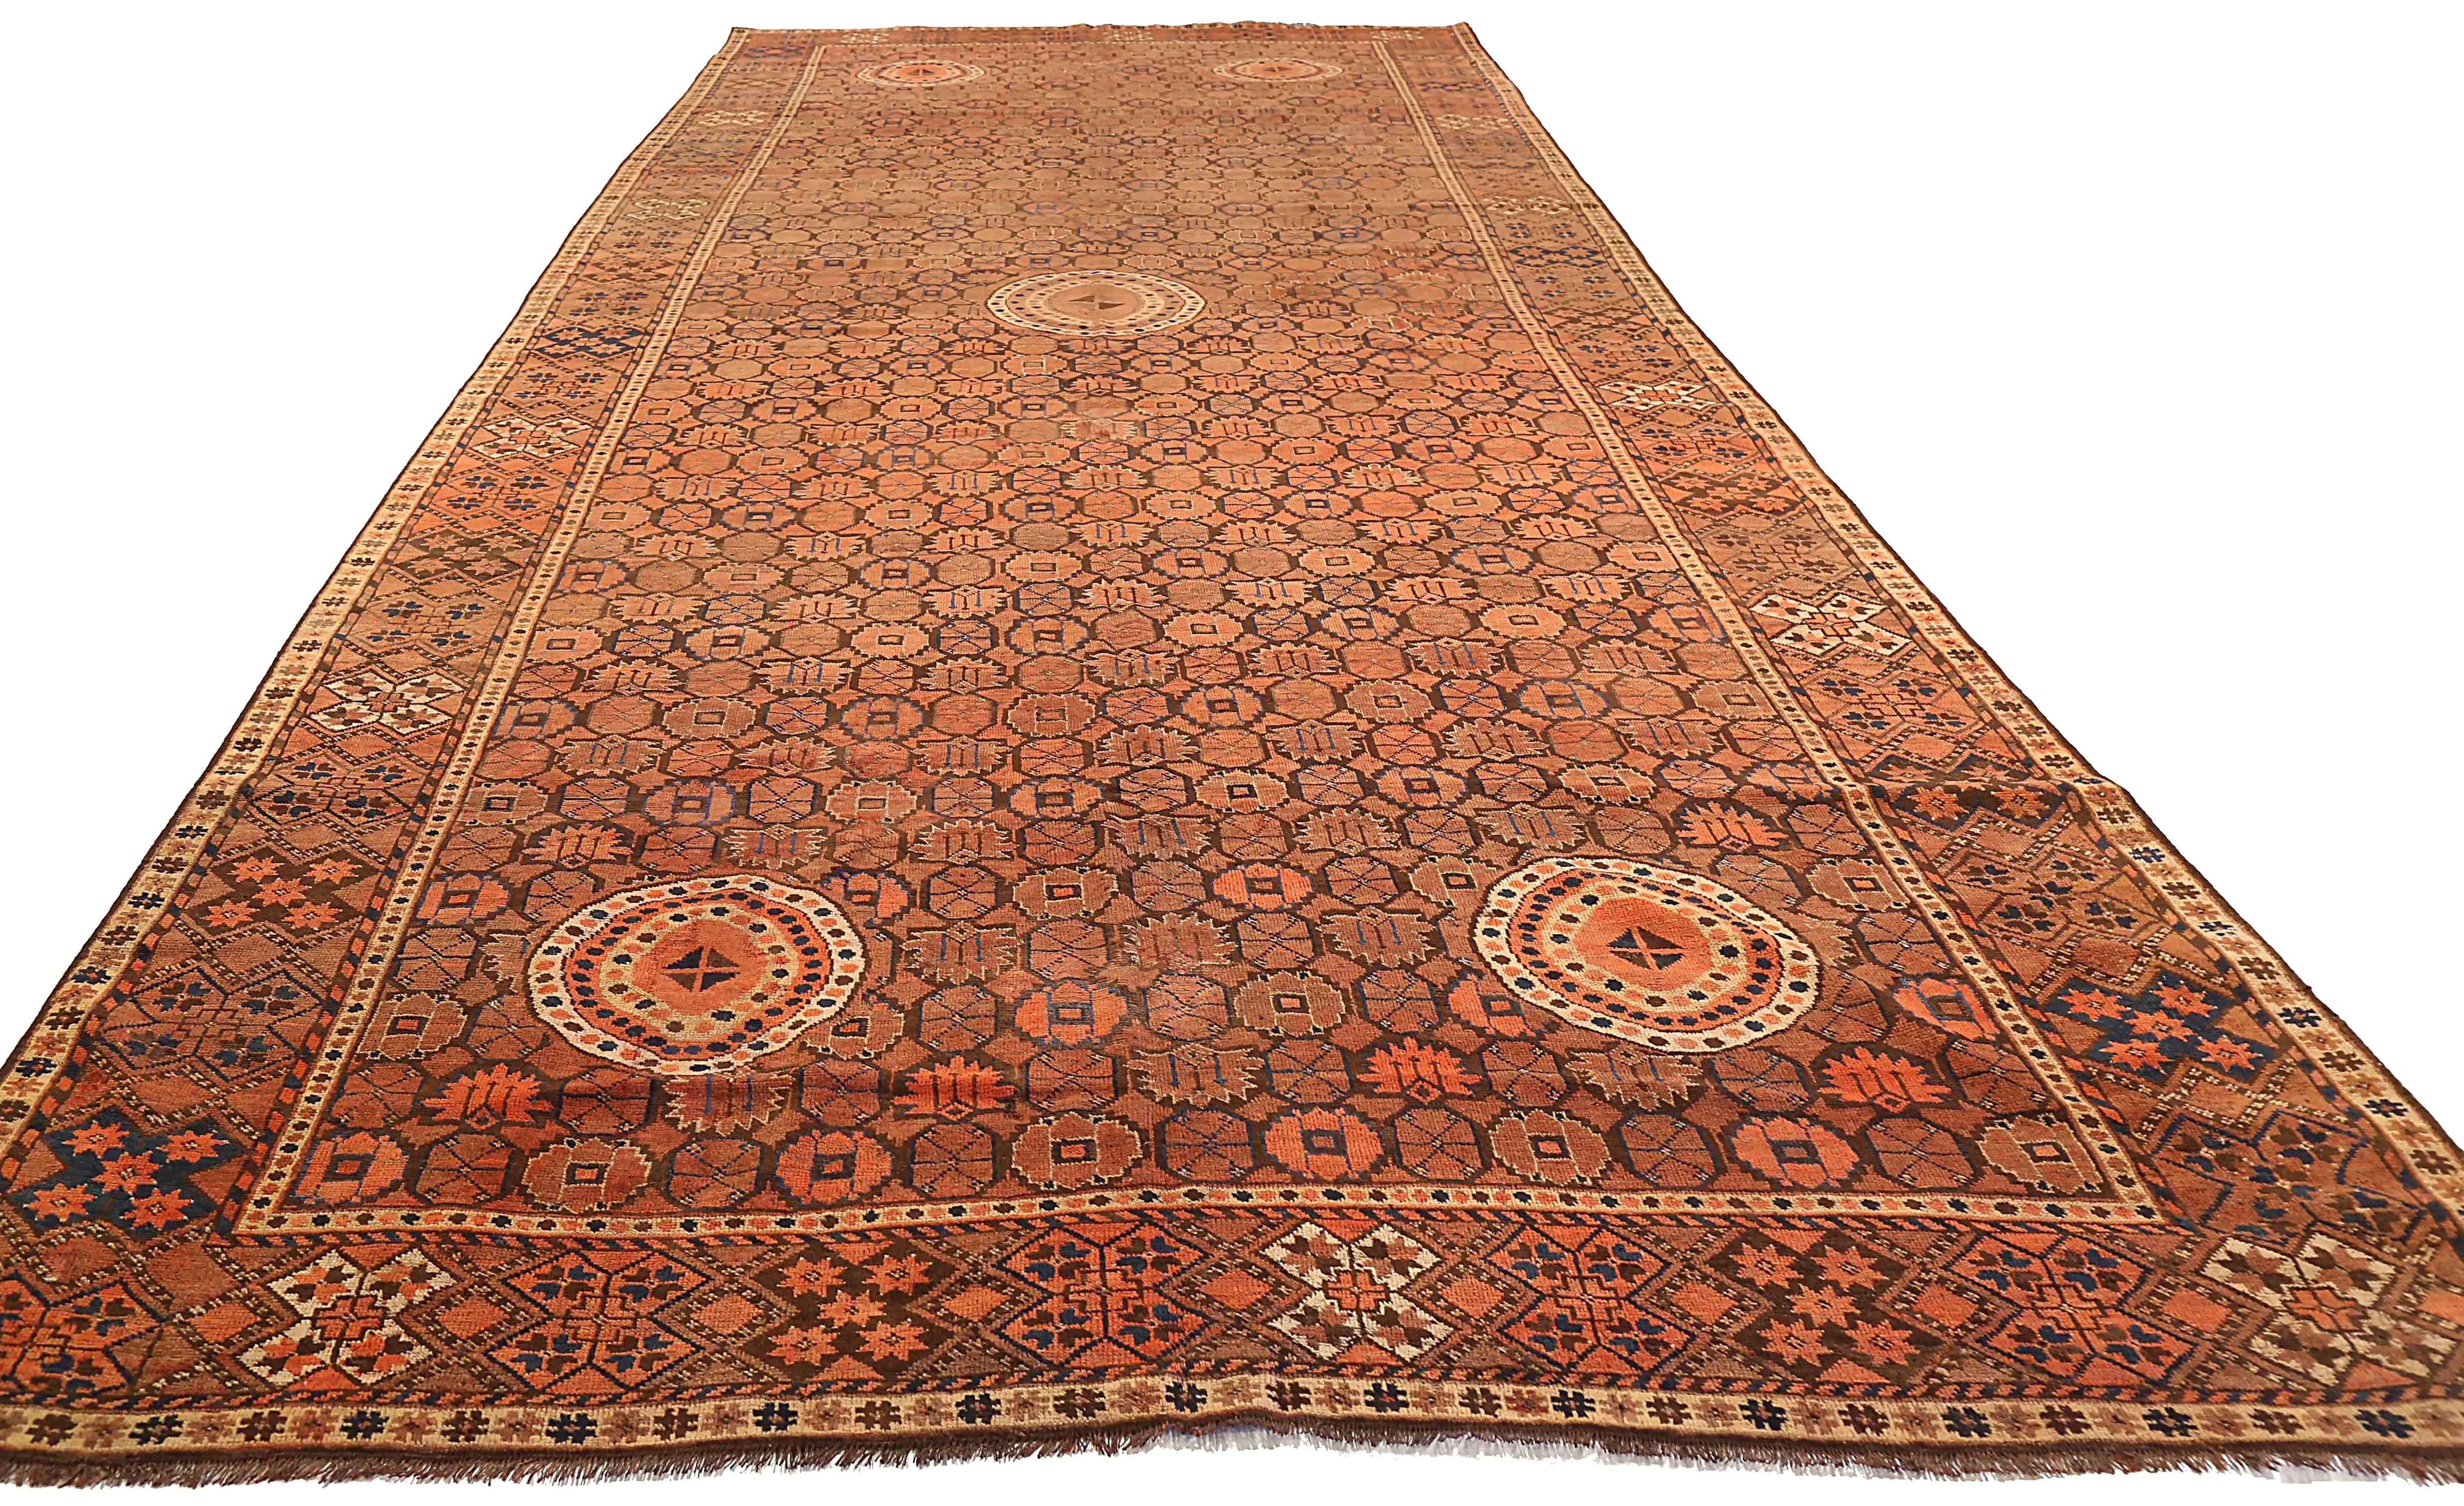 Antique Afghan area rug handwoven from the finest sheep’s wool. It’s colored with all-natural vegetable dyes that are safe for humans and pets. It’s a traditional Bashir design handwoven by expert artisans. It’s a lovely area rug that can be